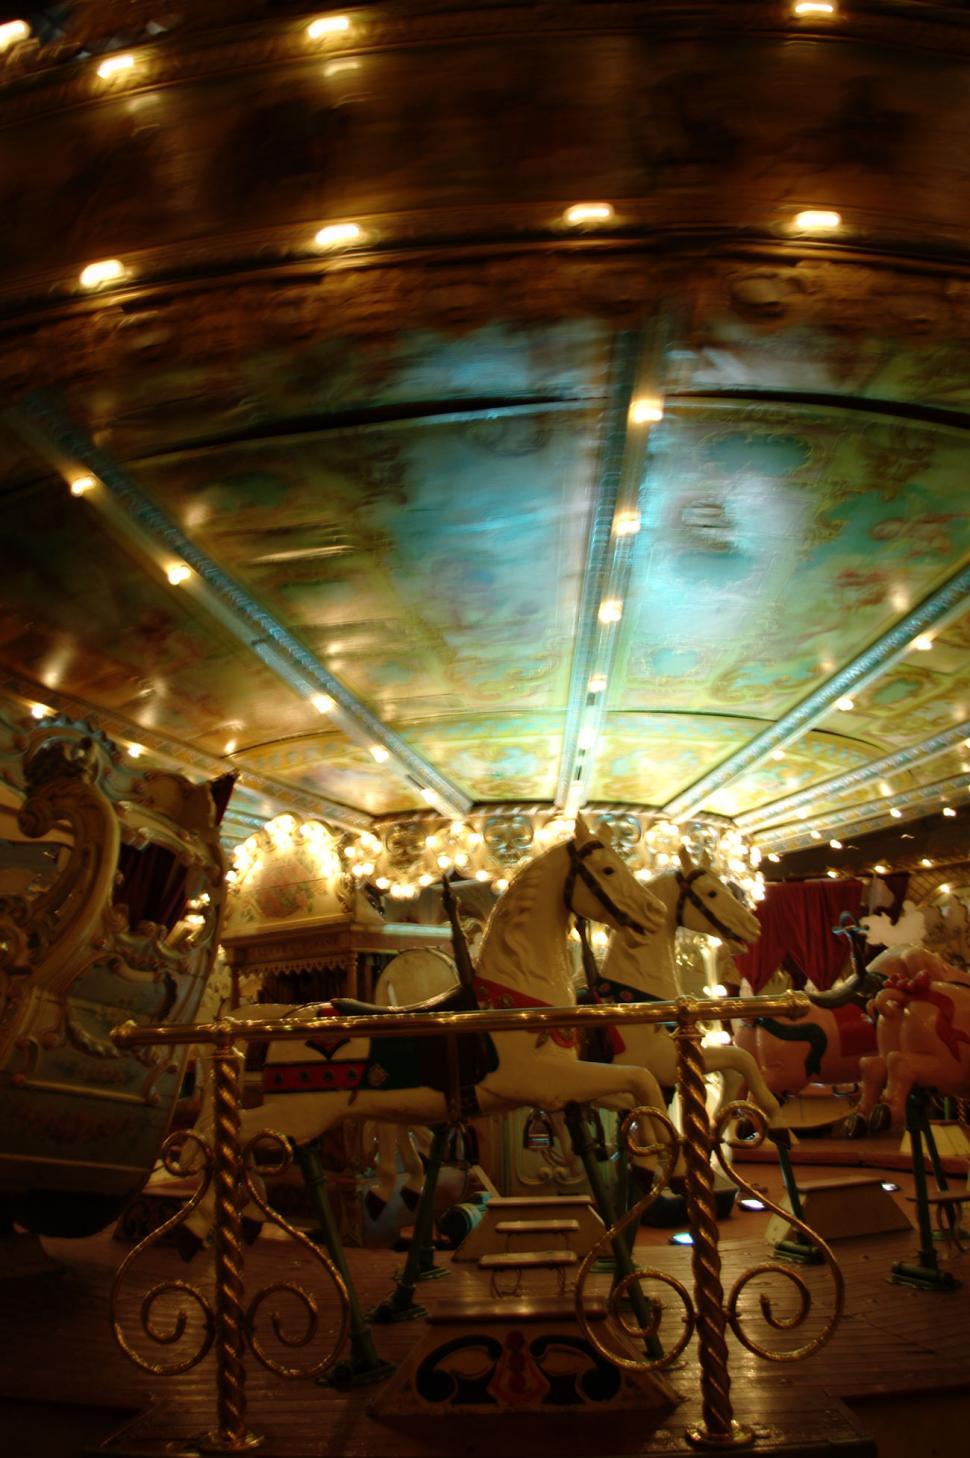 Free Image of A Vibrant Merry Go Round With Lights and Horses 